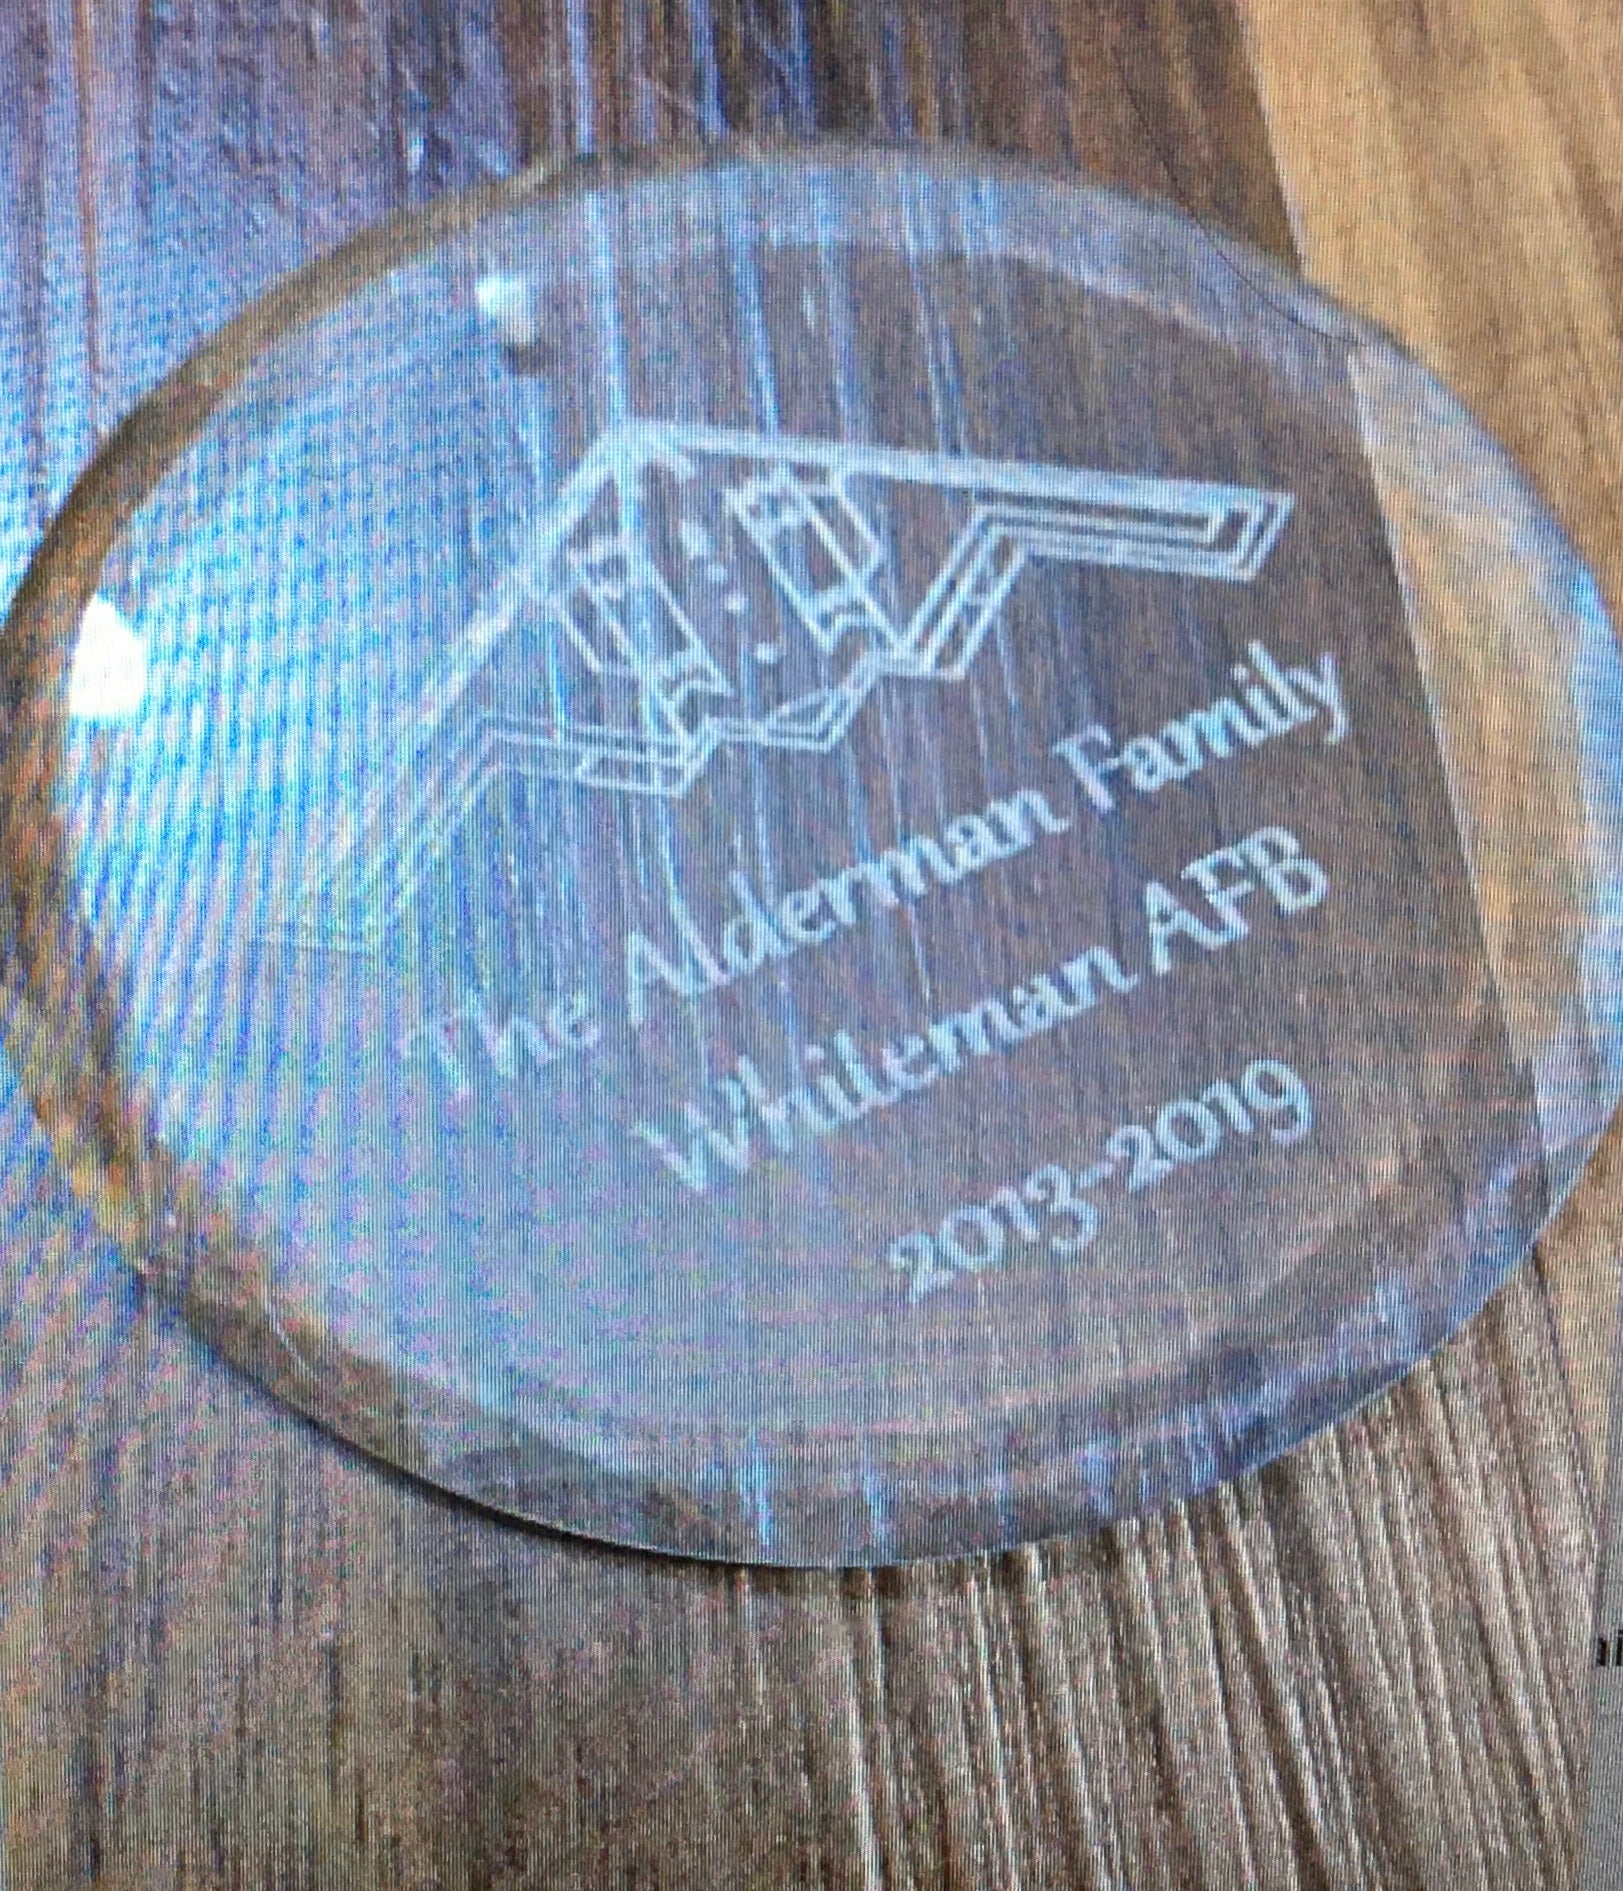 Etched Glass B-2 Ornament